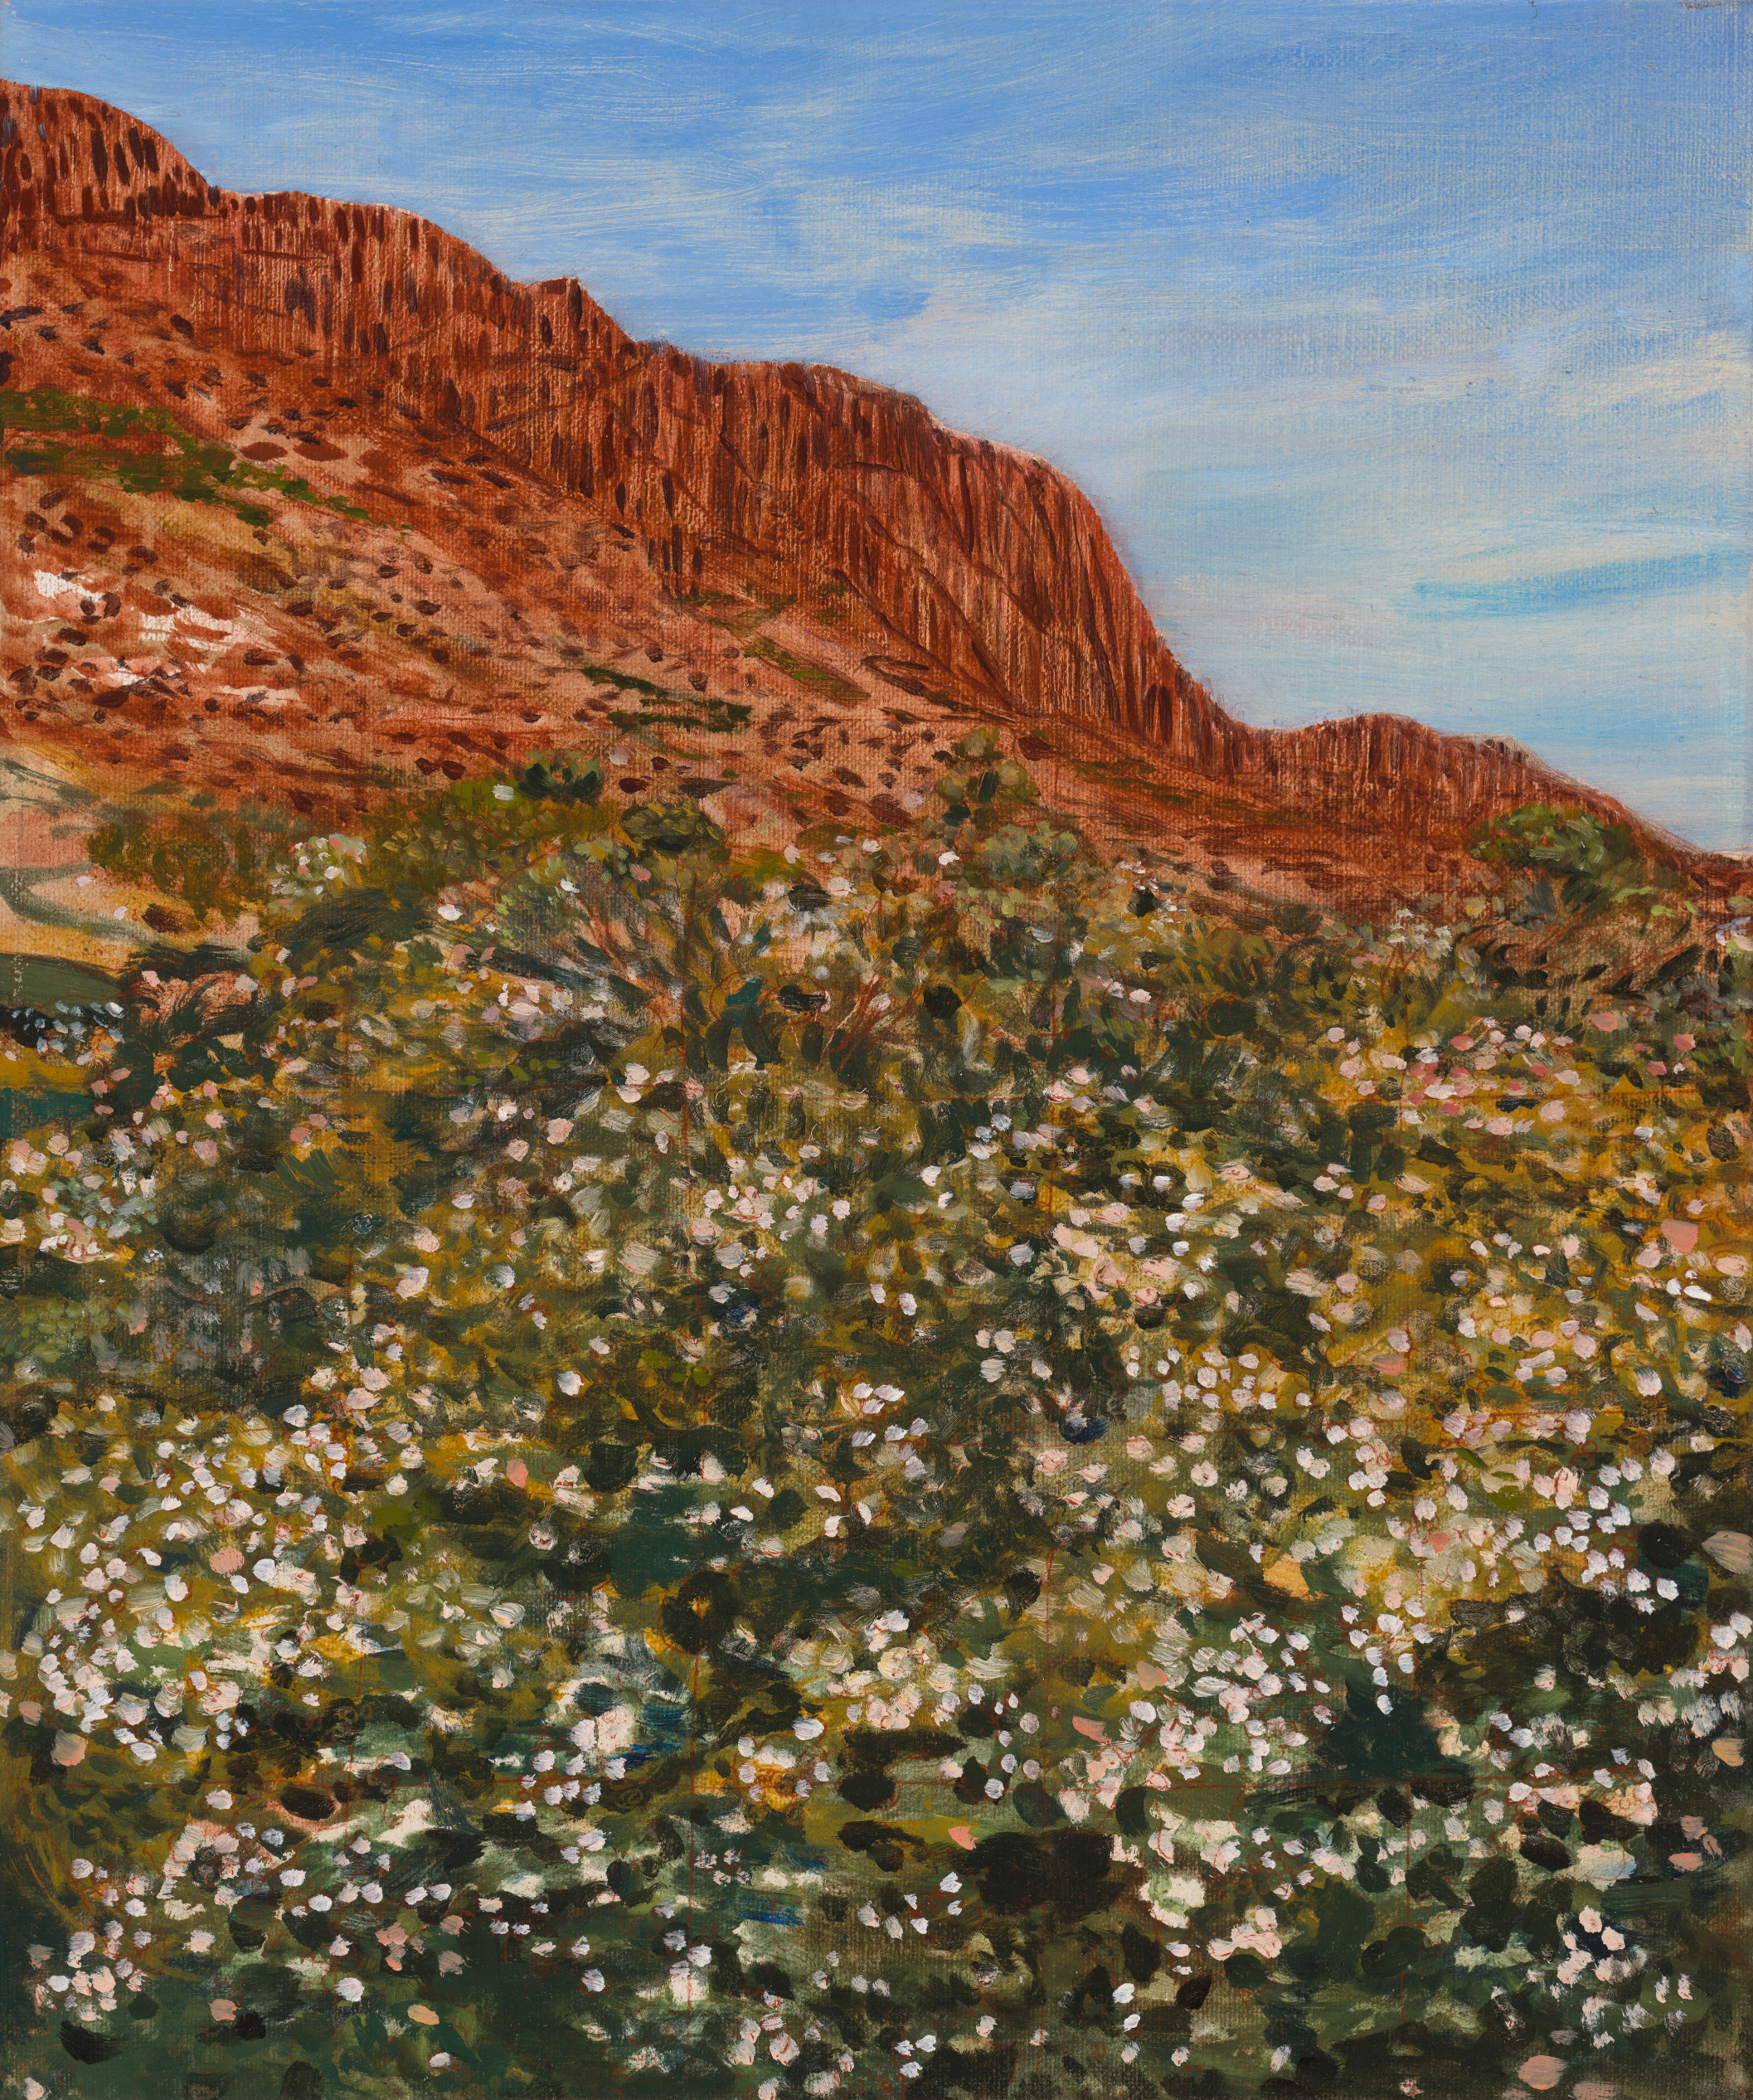 A Sea of Wildflowers, 2021. Oil on linen, 30 x 26cm. by Betra | Lethbridge 20000 2022 Finalists | Lethbridge Gallery